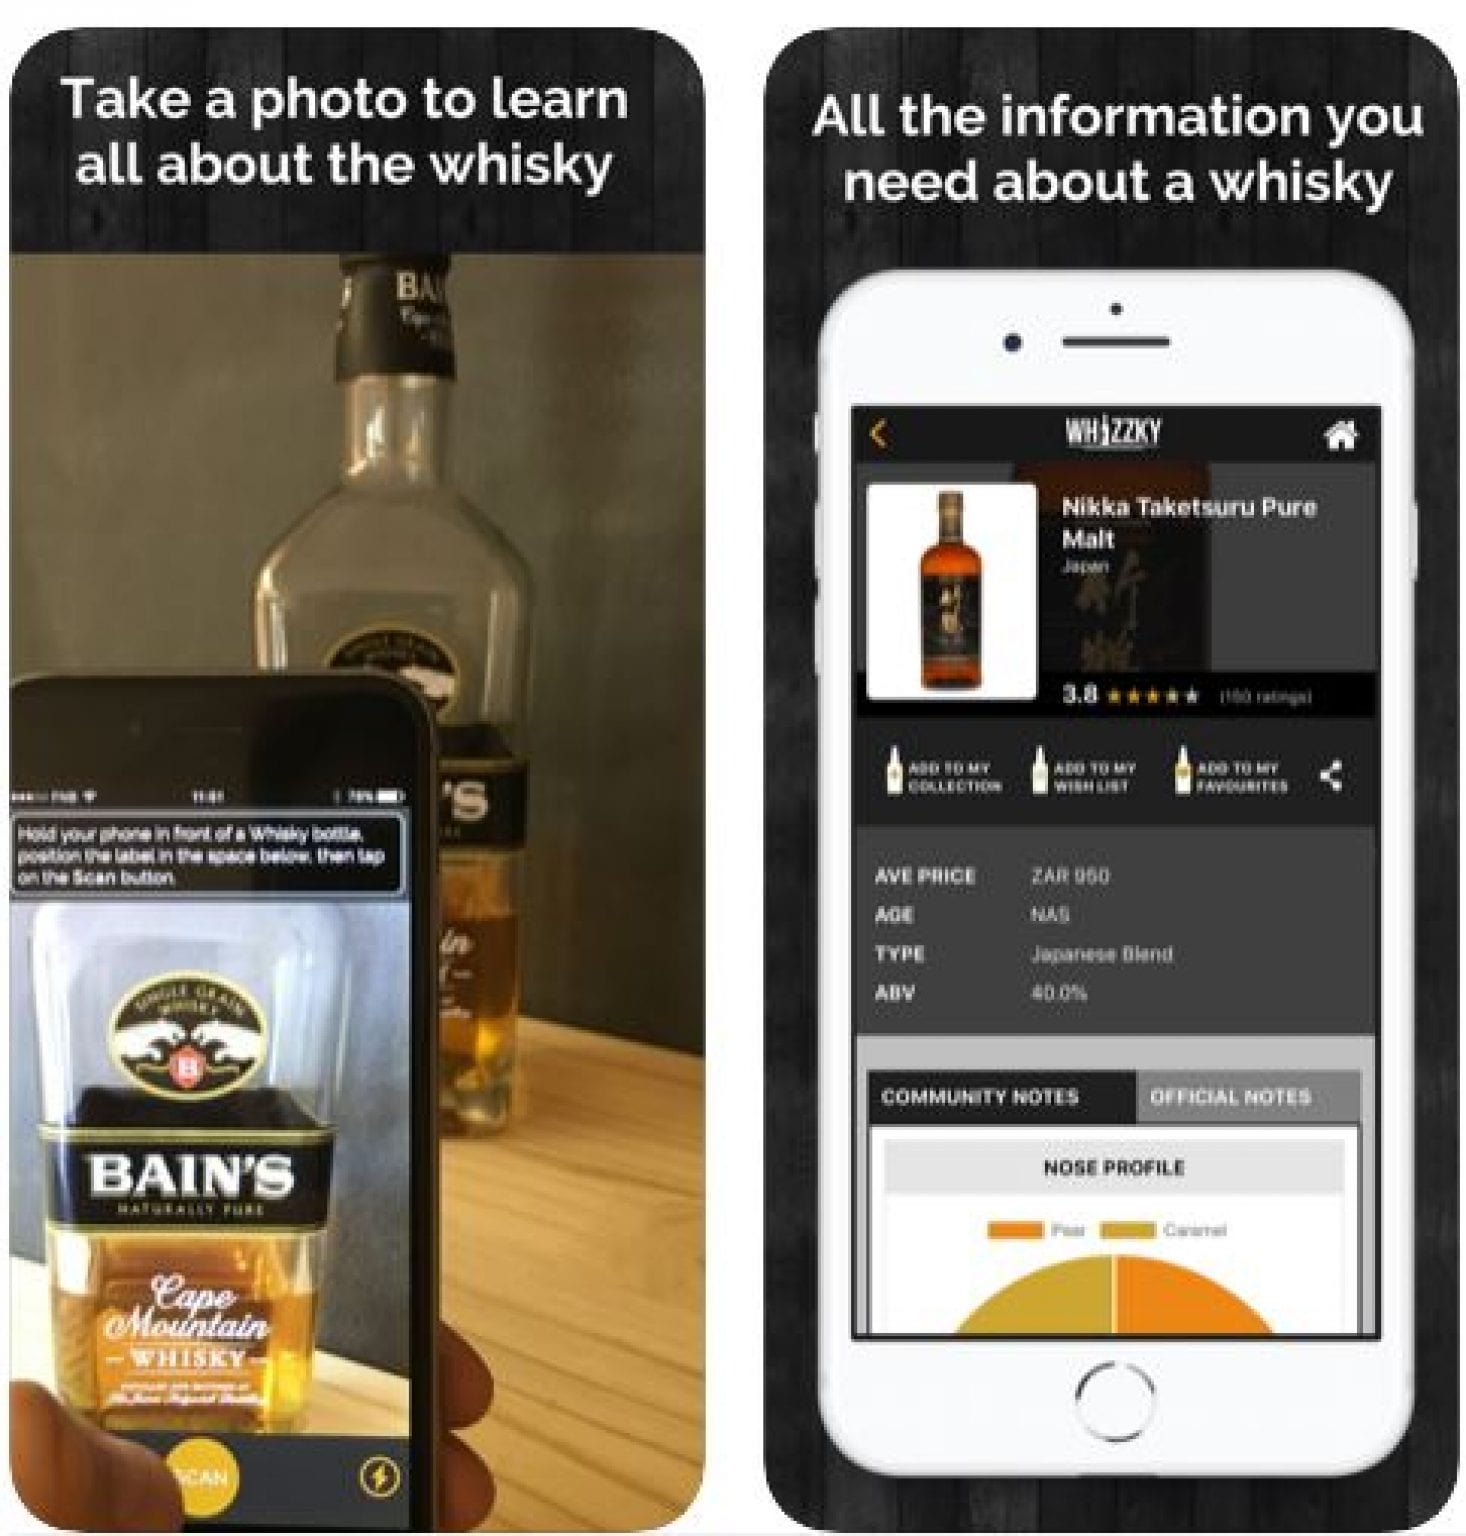 untappd app for whiskey